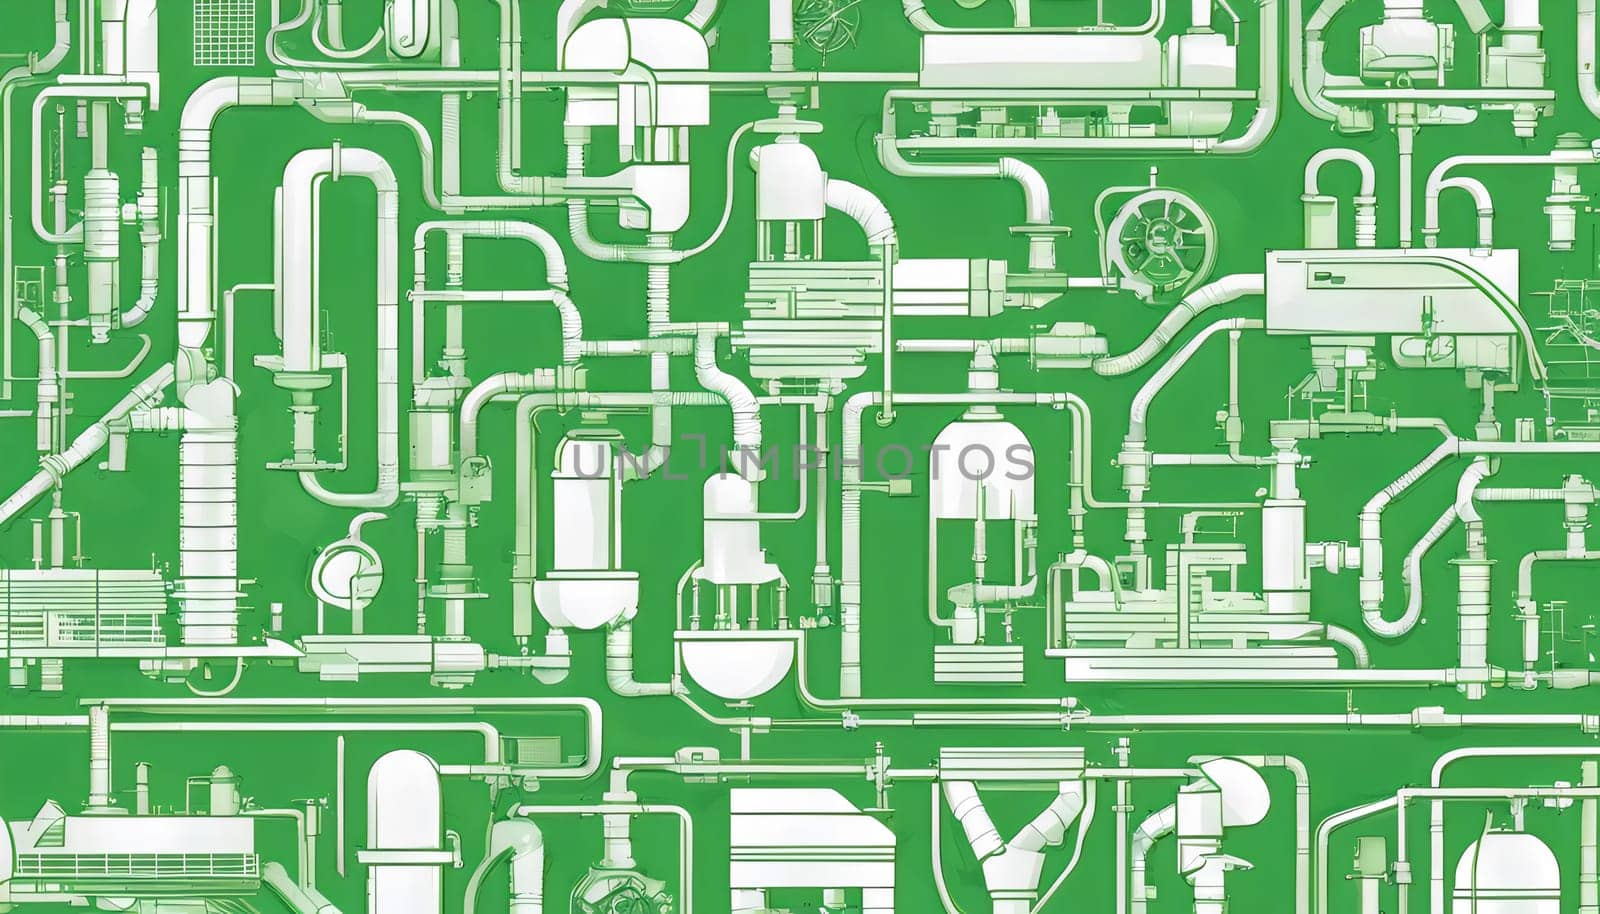 Complex Network of Green Pipes and Valves by rostik924